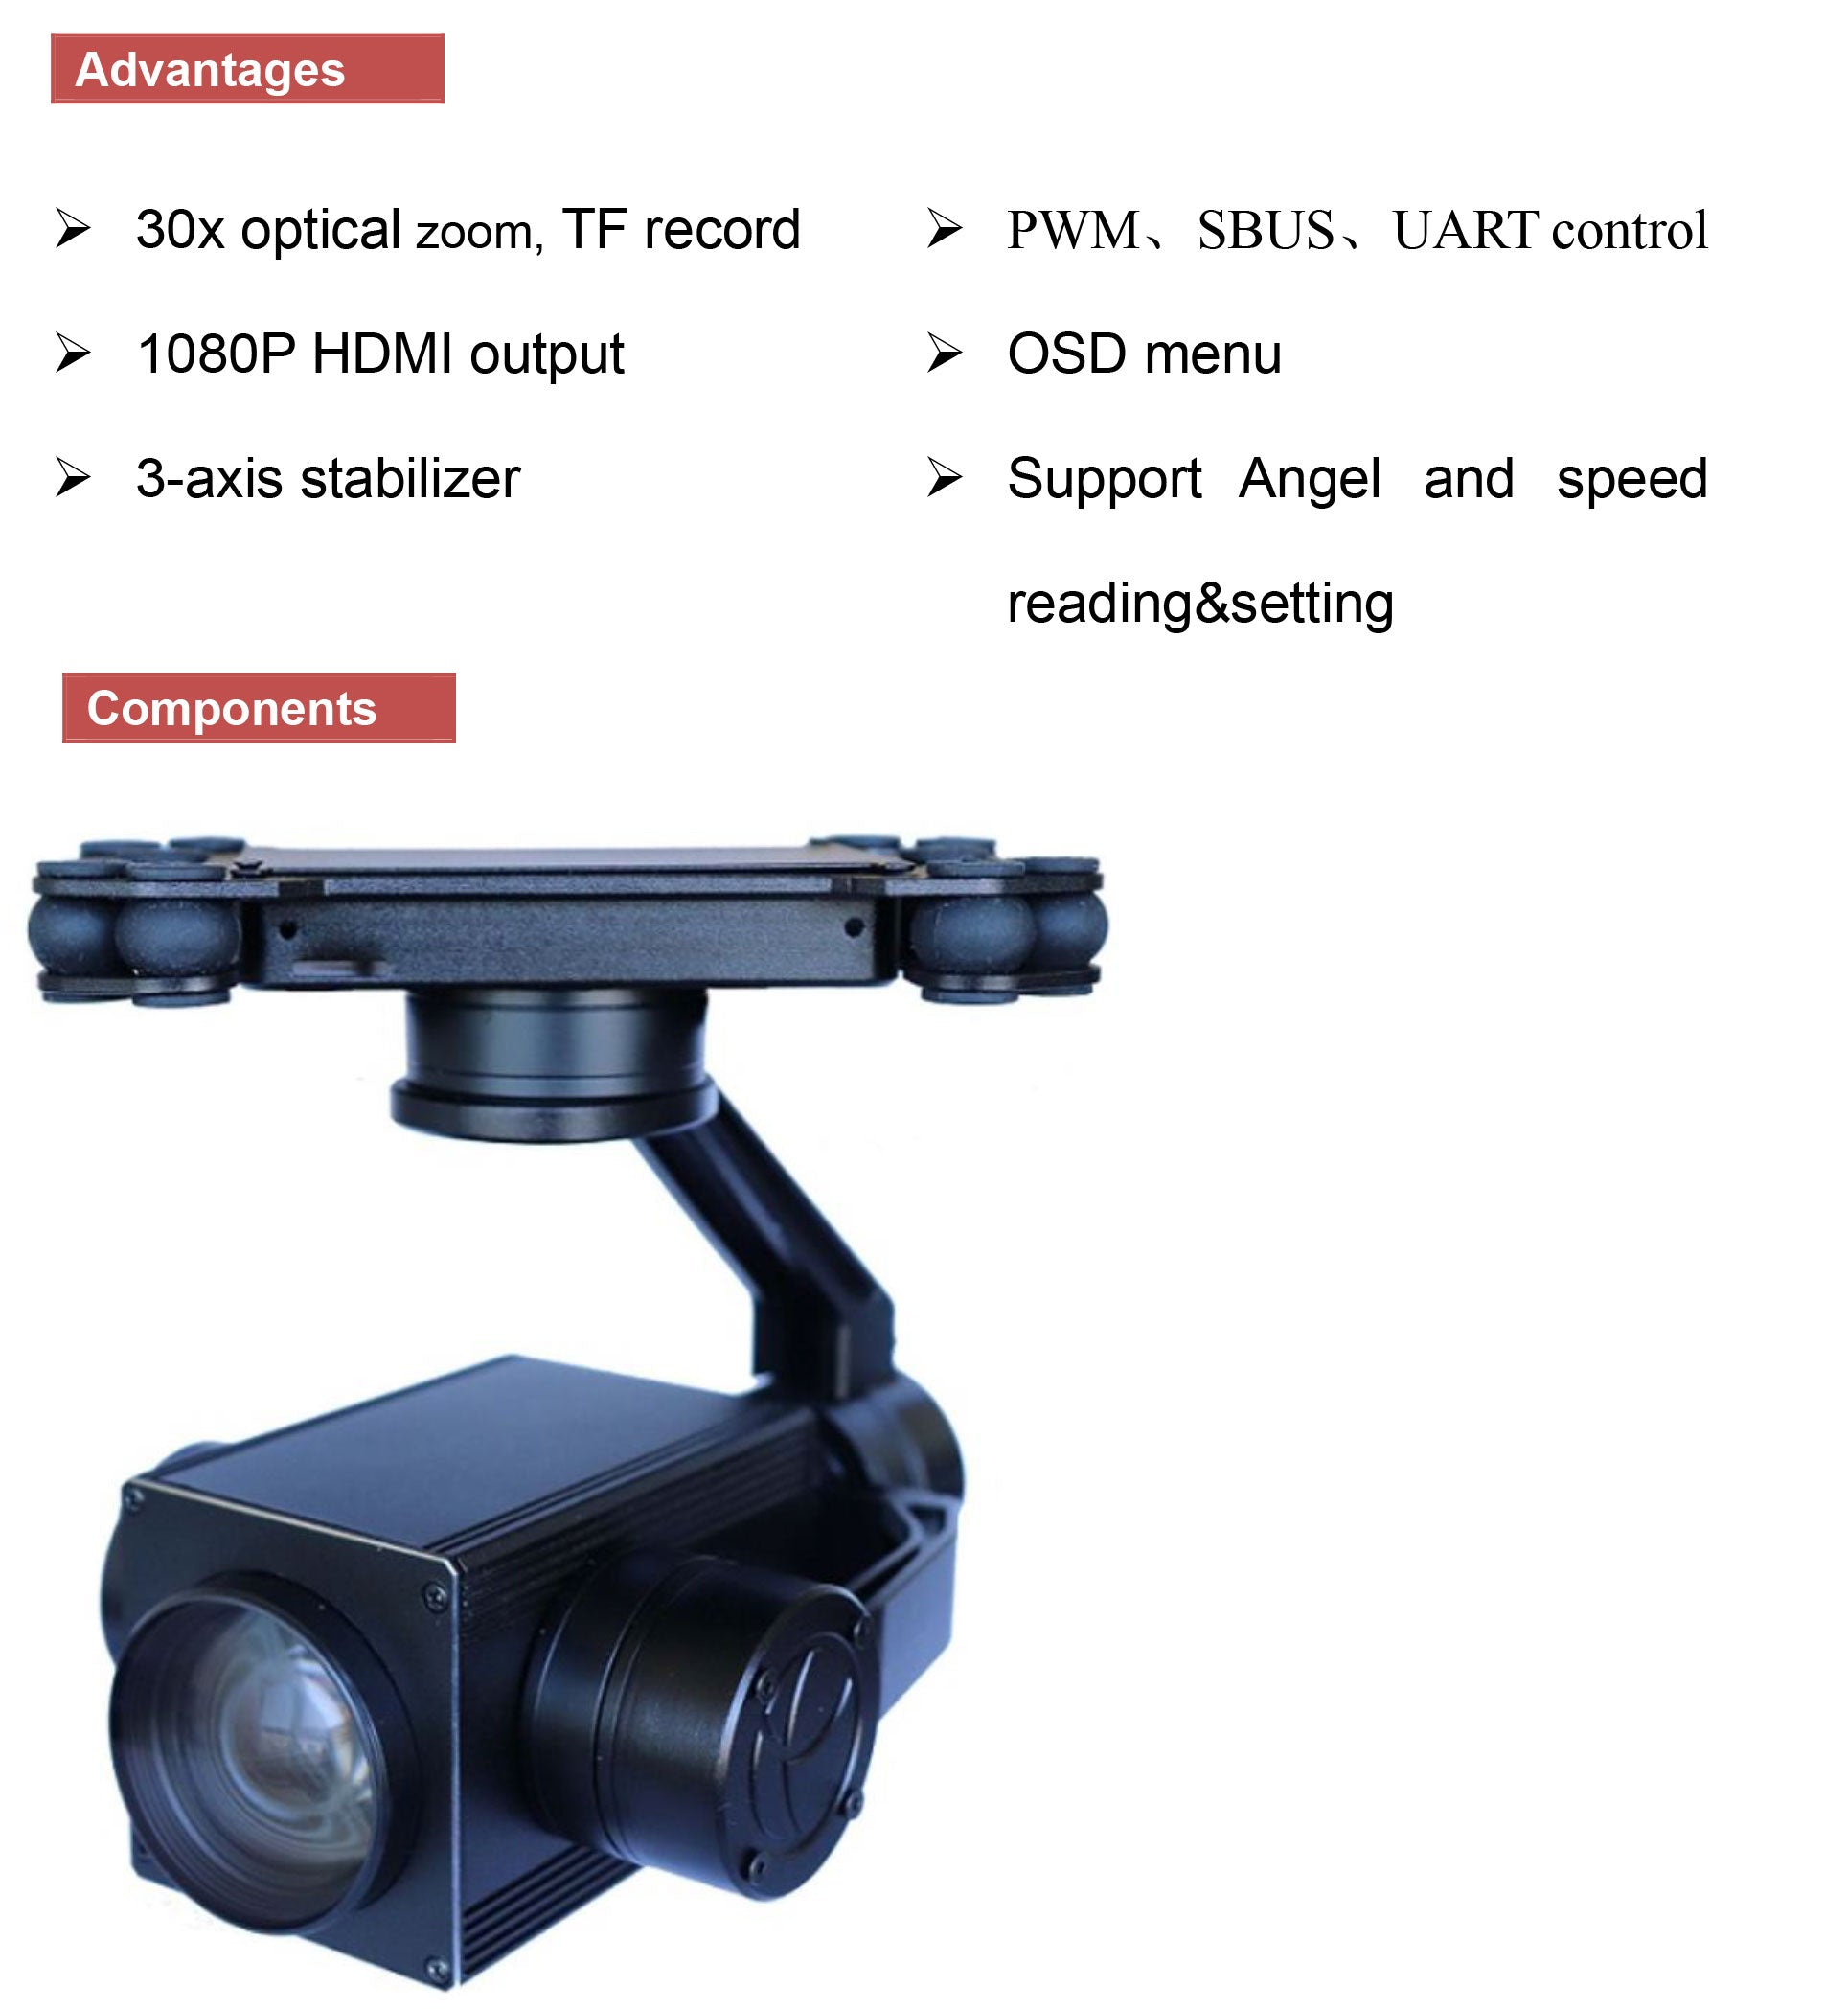 TOPOTEK TP30 Drone Camera Gimbal, Camera features: 30x optical zoom, recording modes, stabilization, HDMI output, and customizable settings.